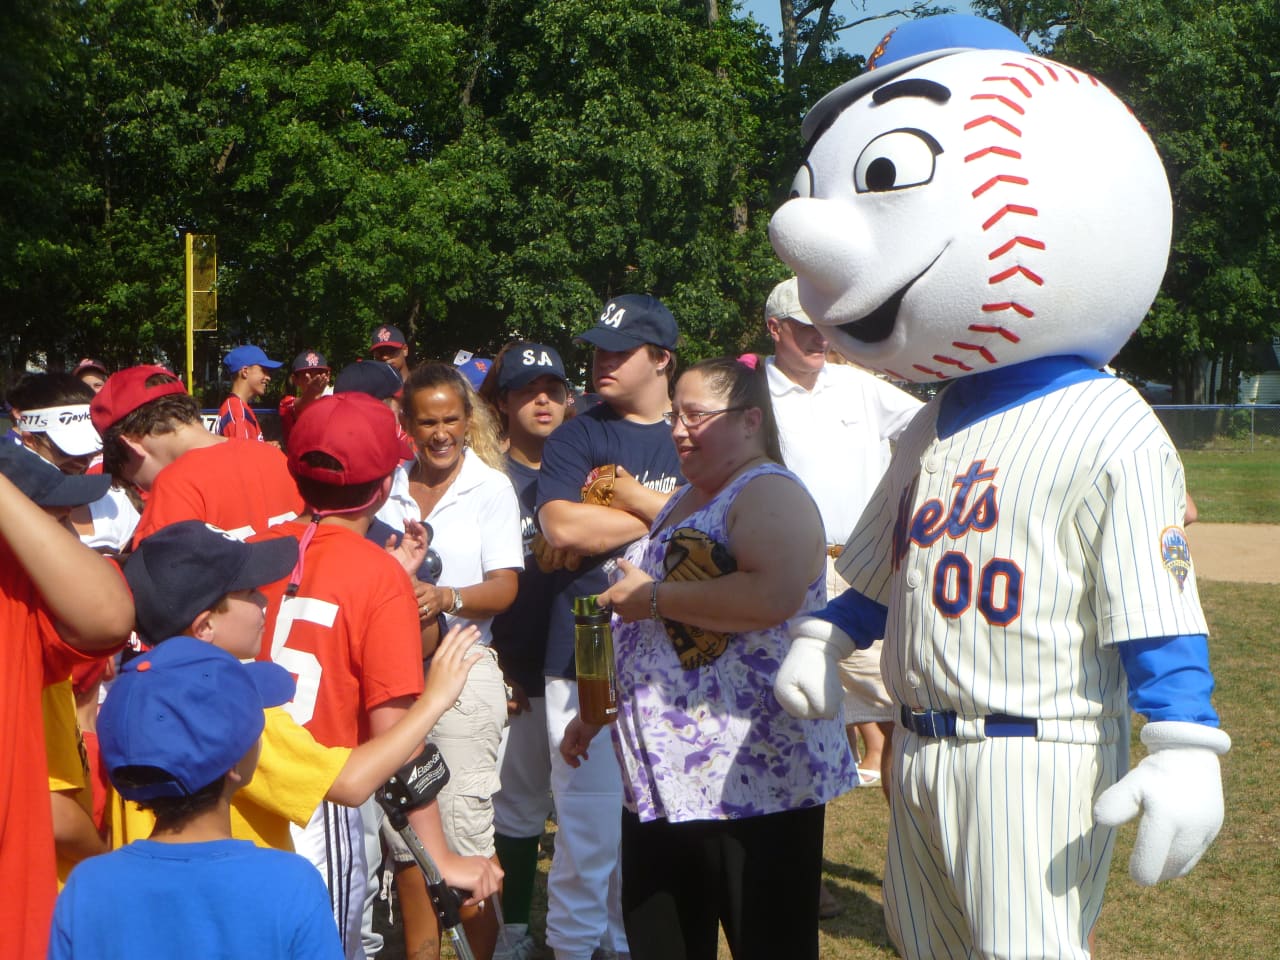 With the Mets out of town Mr. Met will be headed to New Canaan on June 1 to help celebrate Family Kids Day at Citibank in New Canaan. 